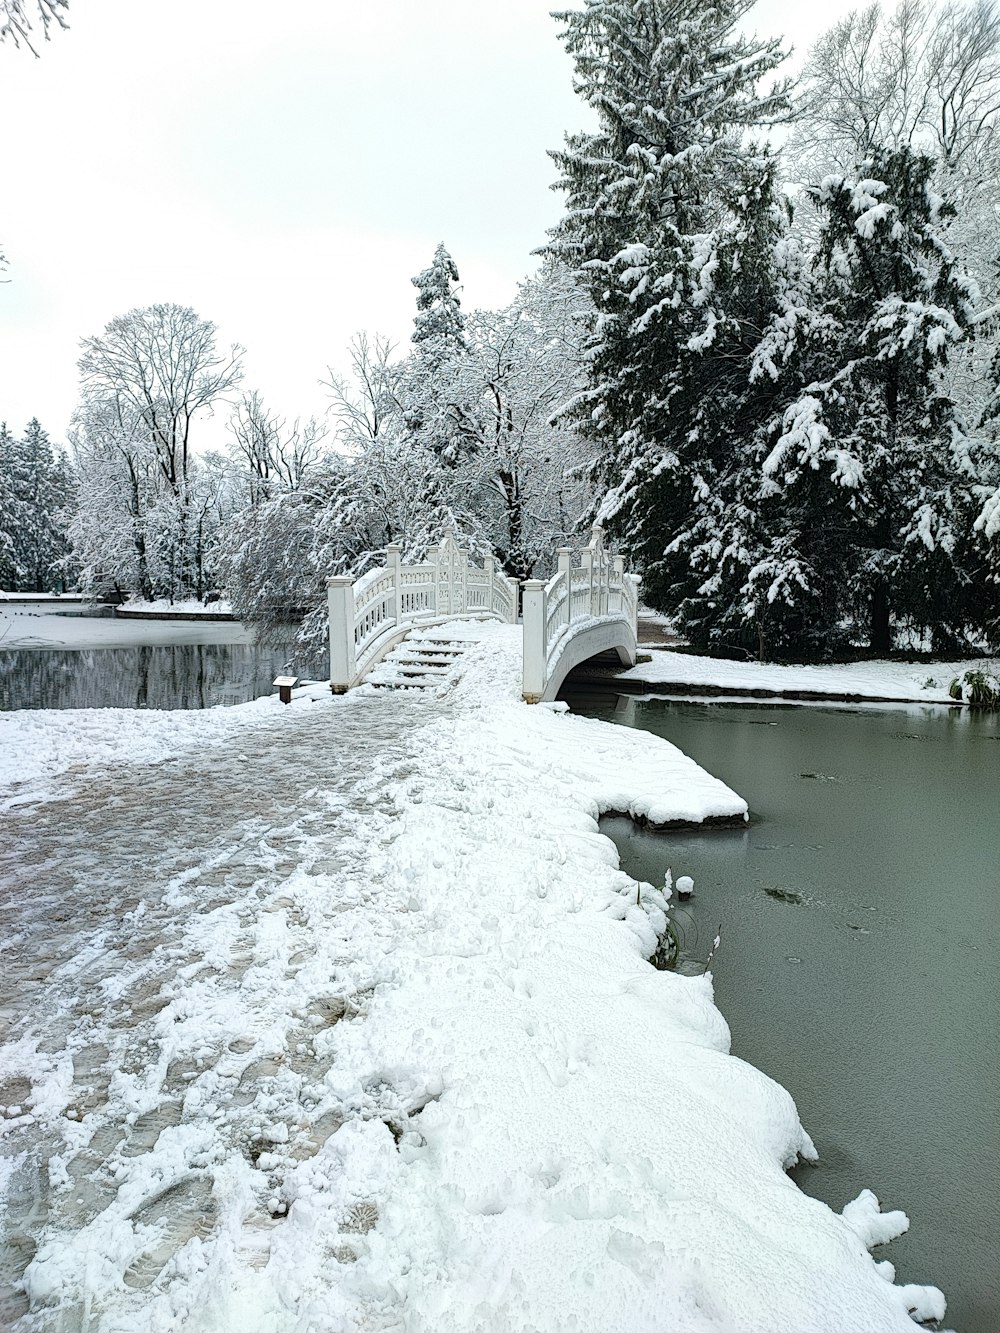 a bridge over a river with snow on the ground